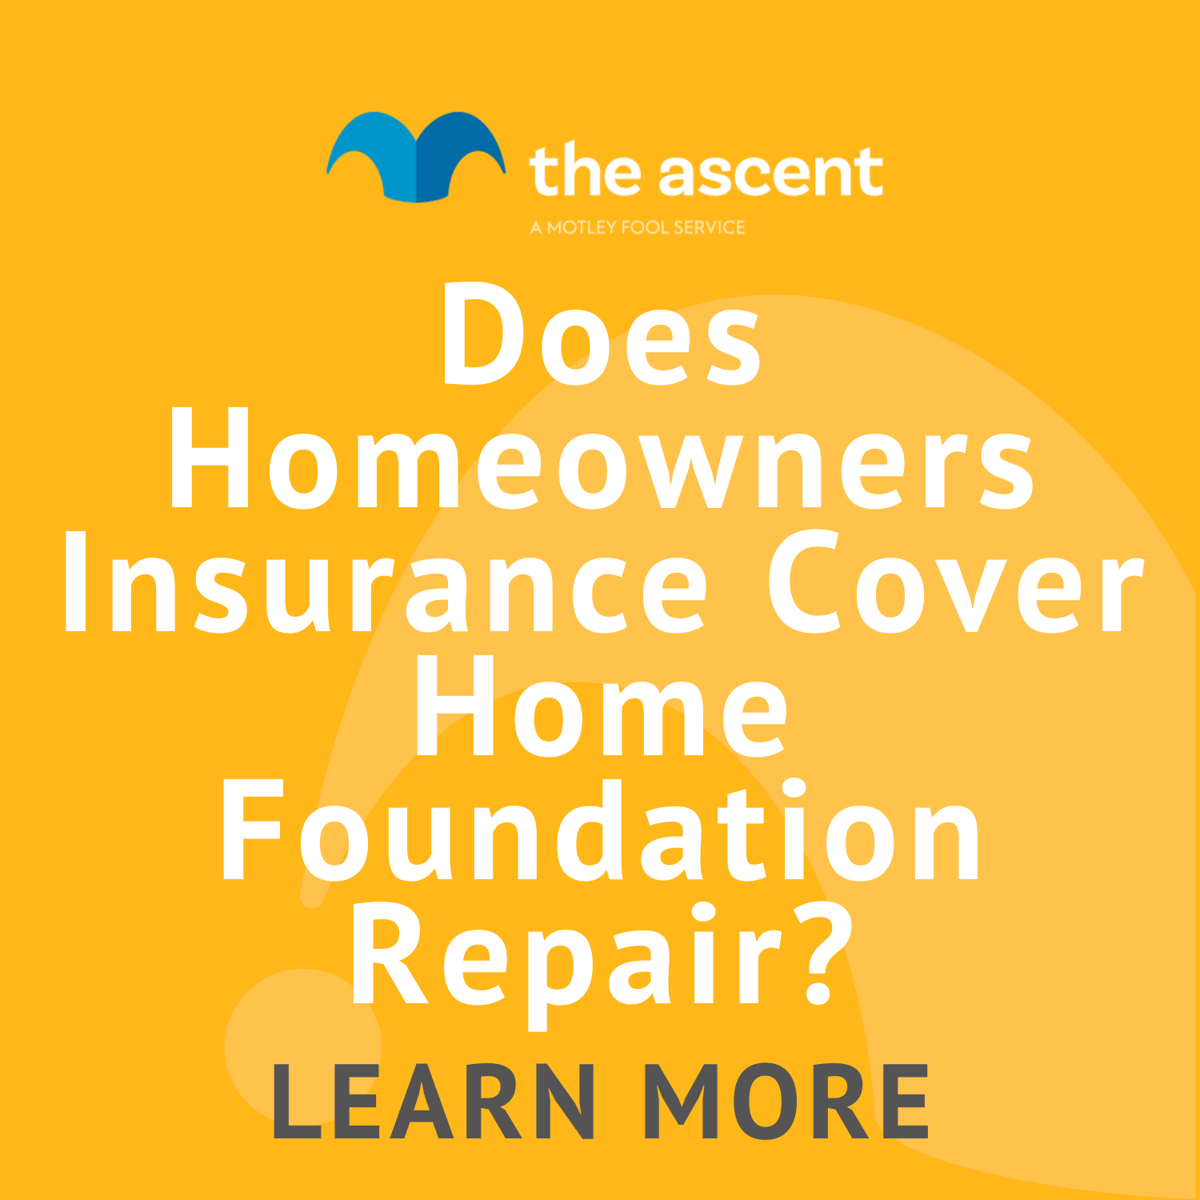 Does Homeowners Insurance Cover Foundation Repair? 